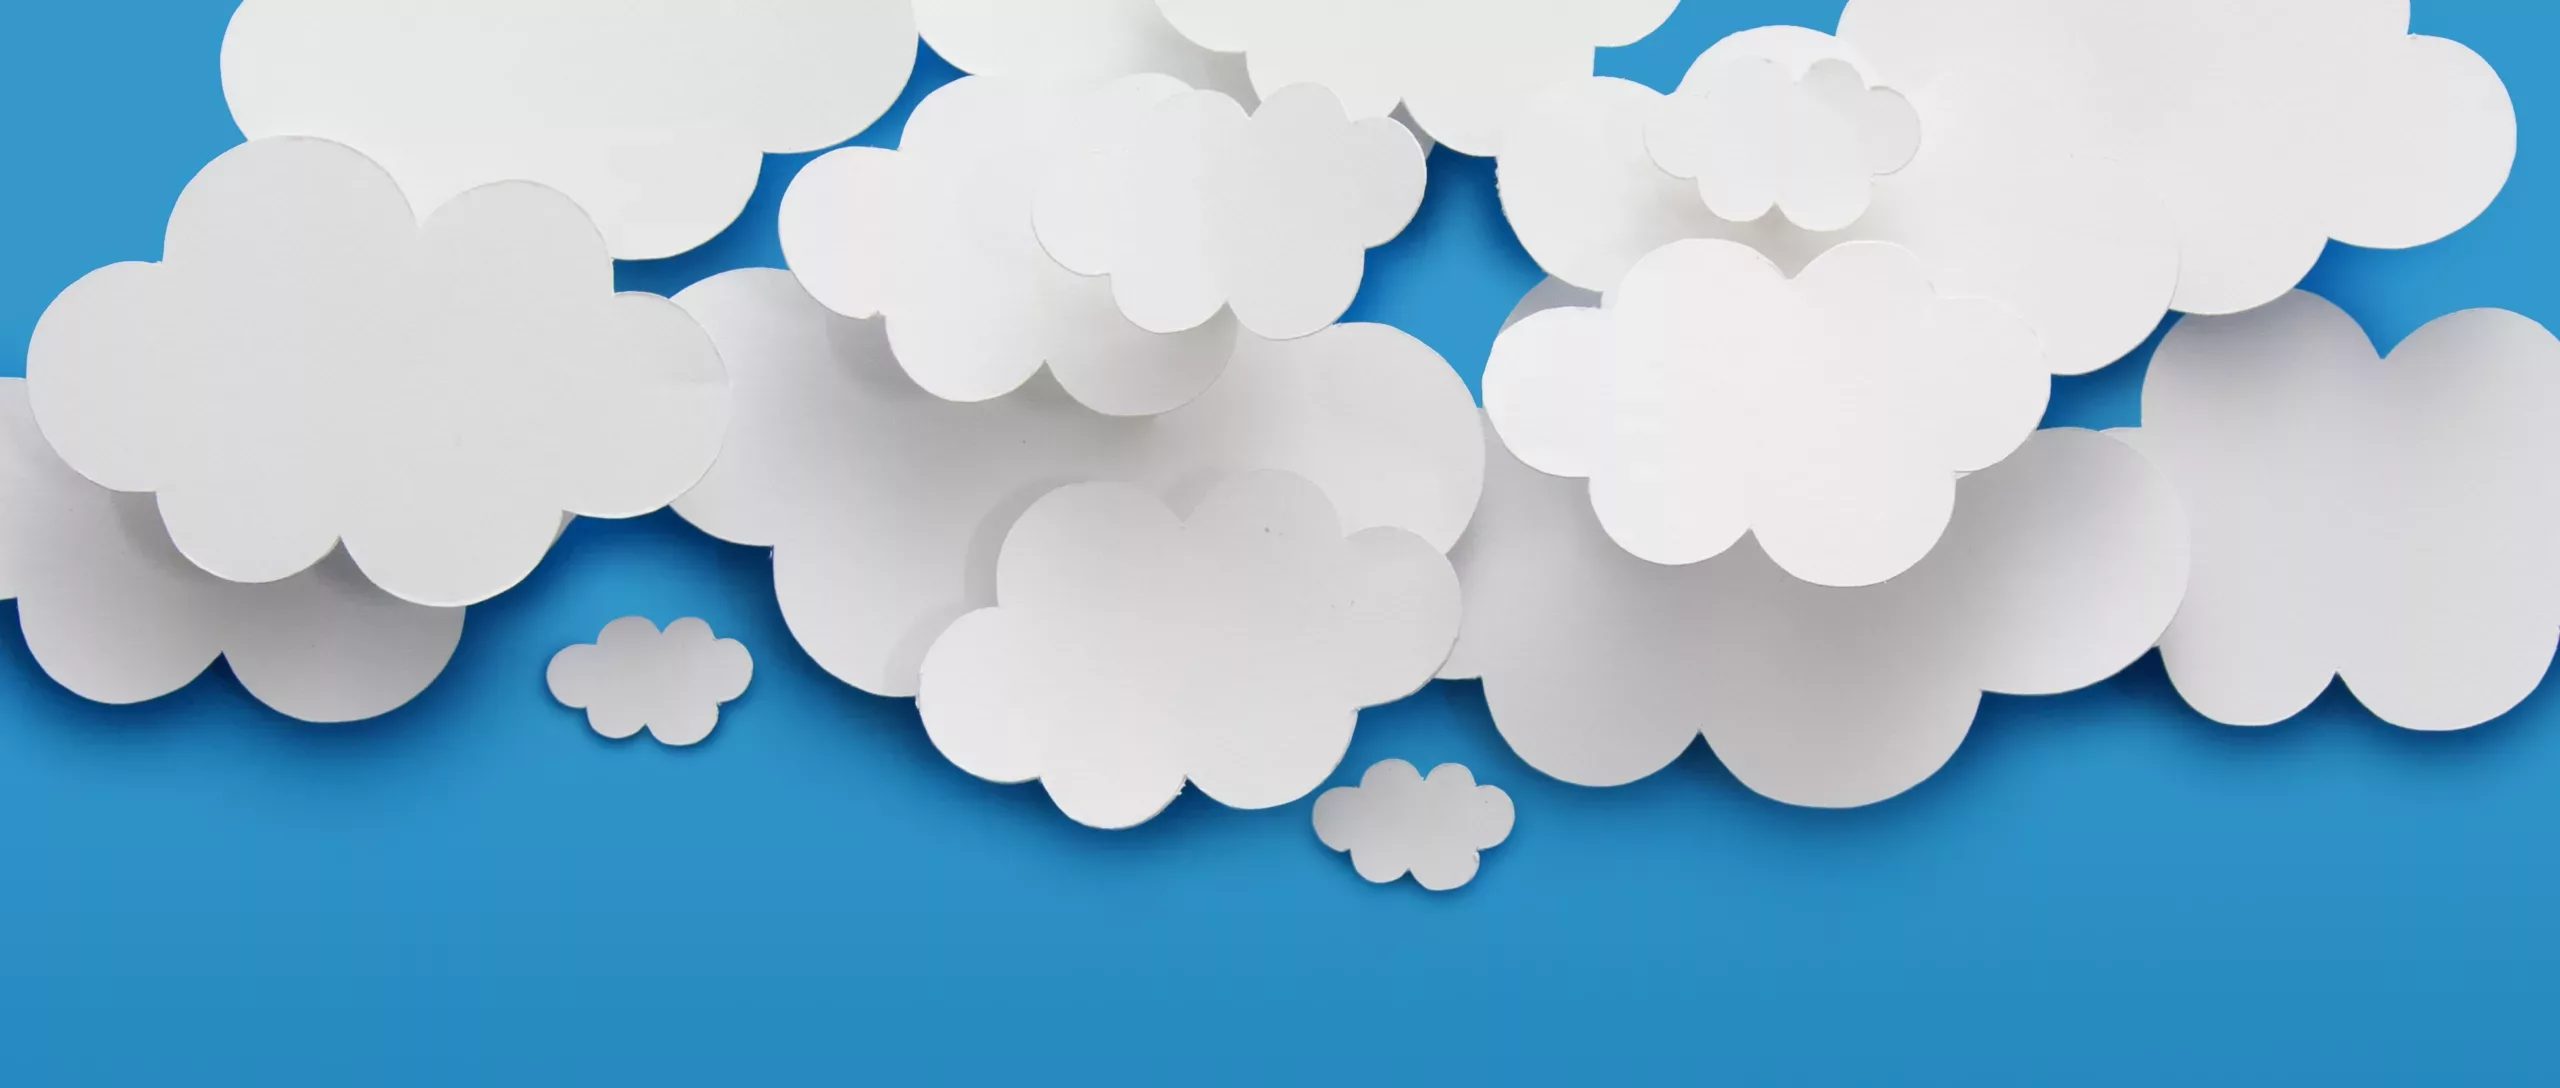 Paper cutouts of clouds on a blue background